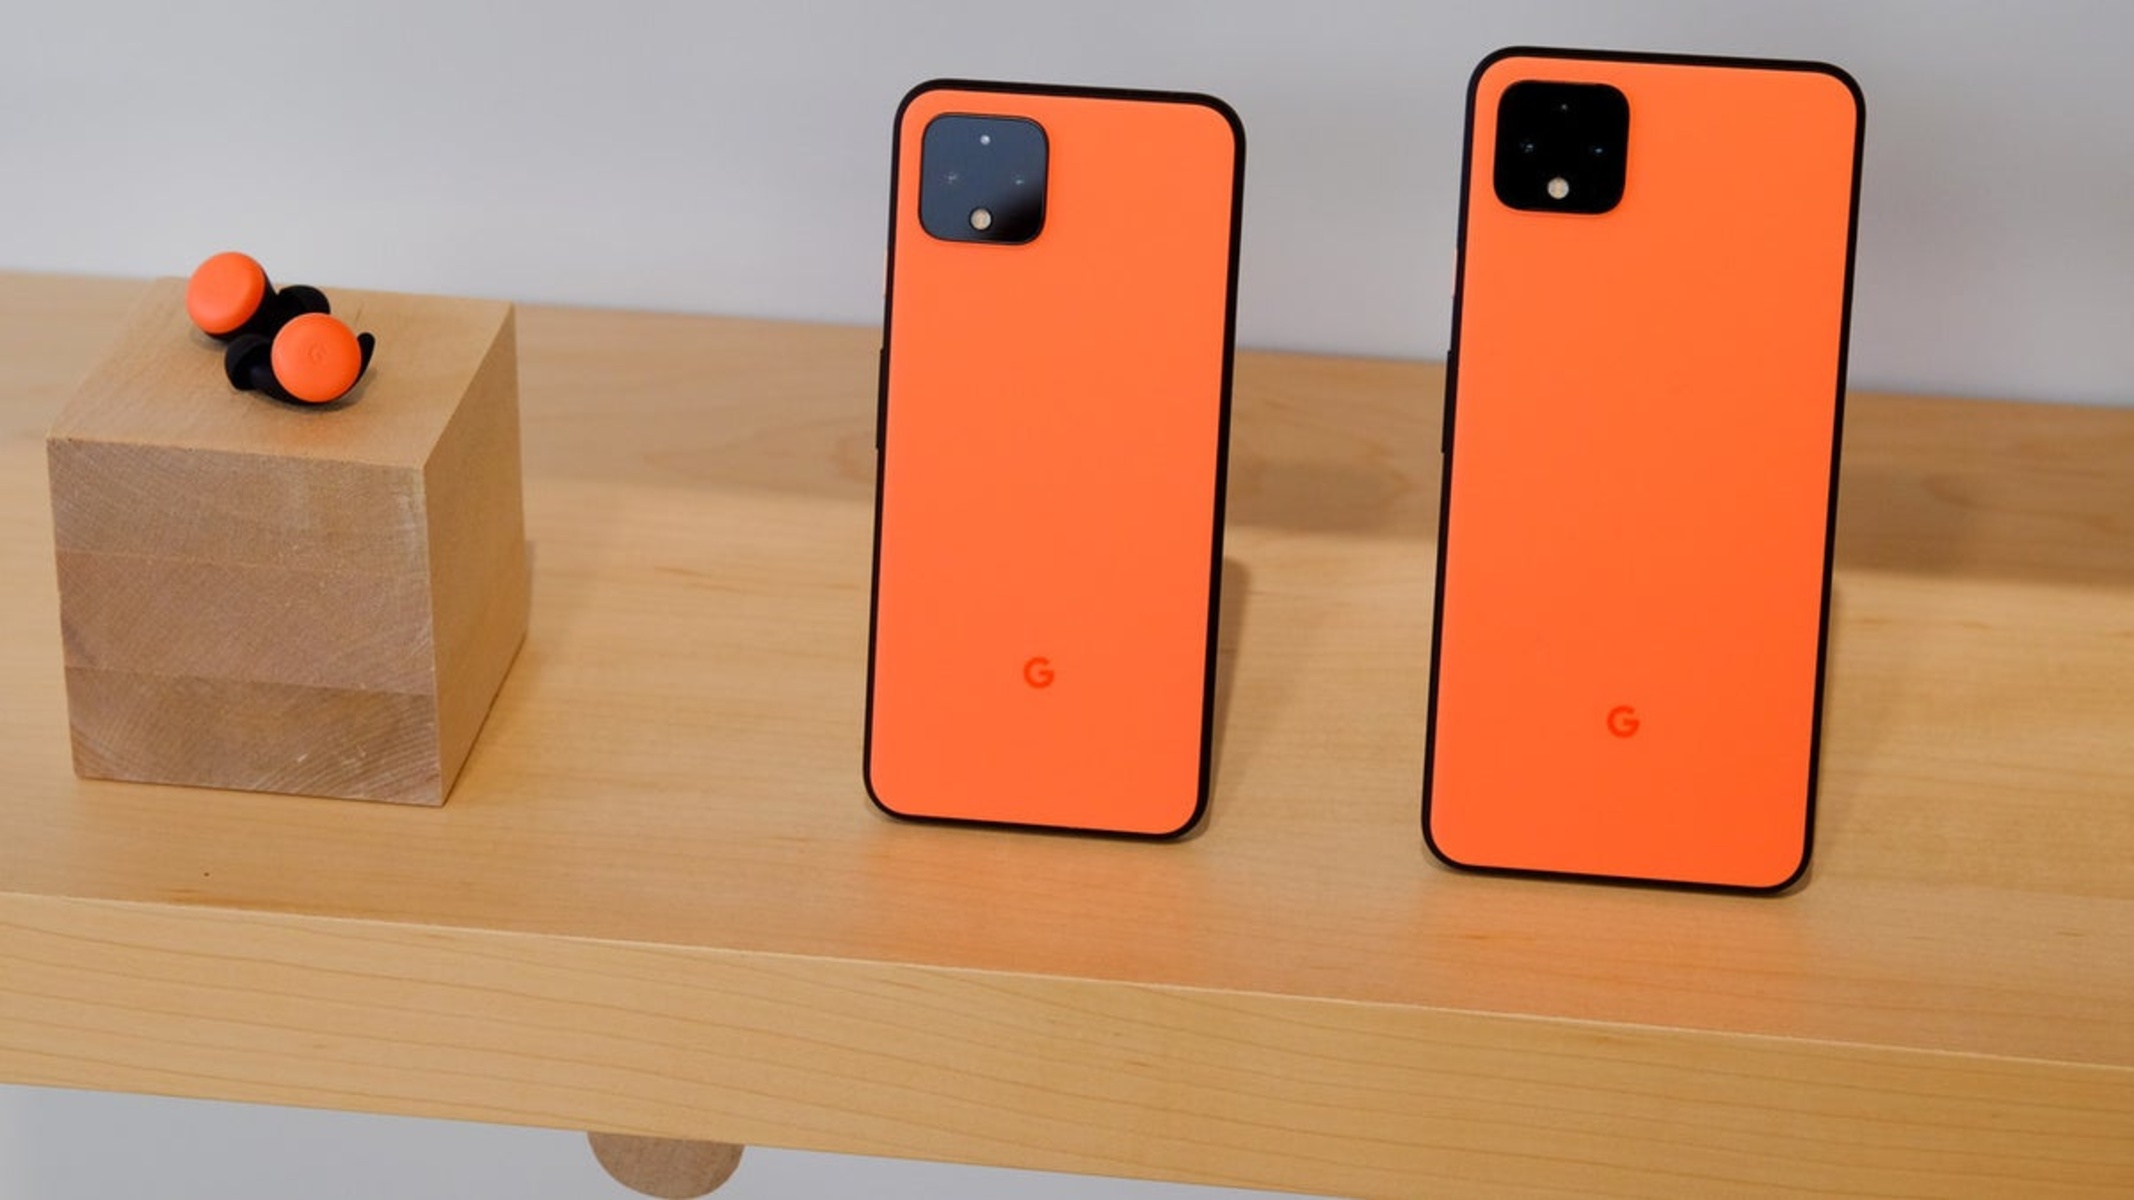 Exclusive Insights: Production Numbers Of Orange Pixel 4